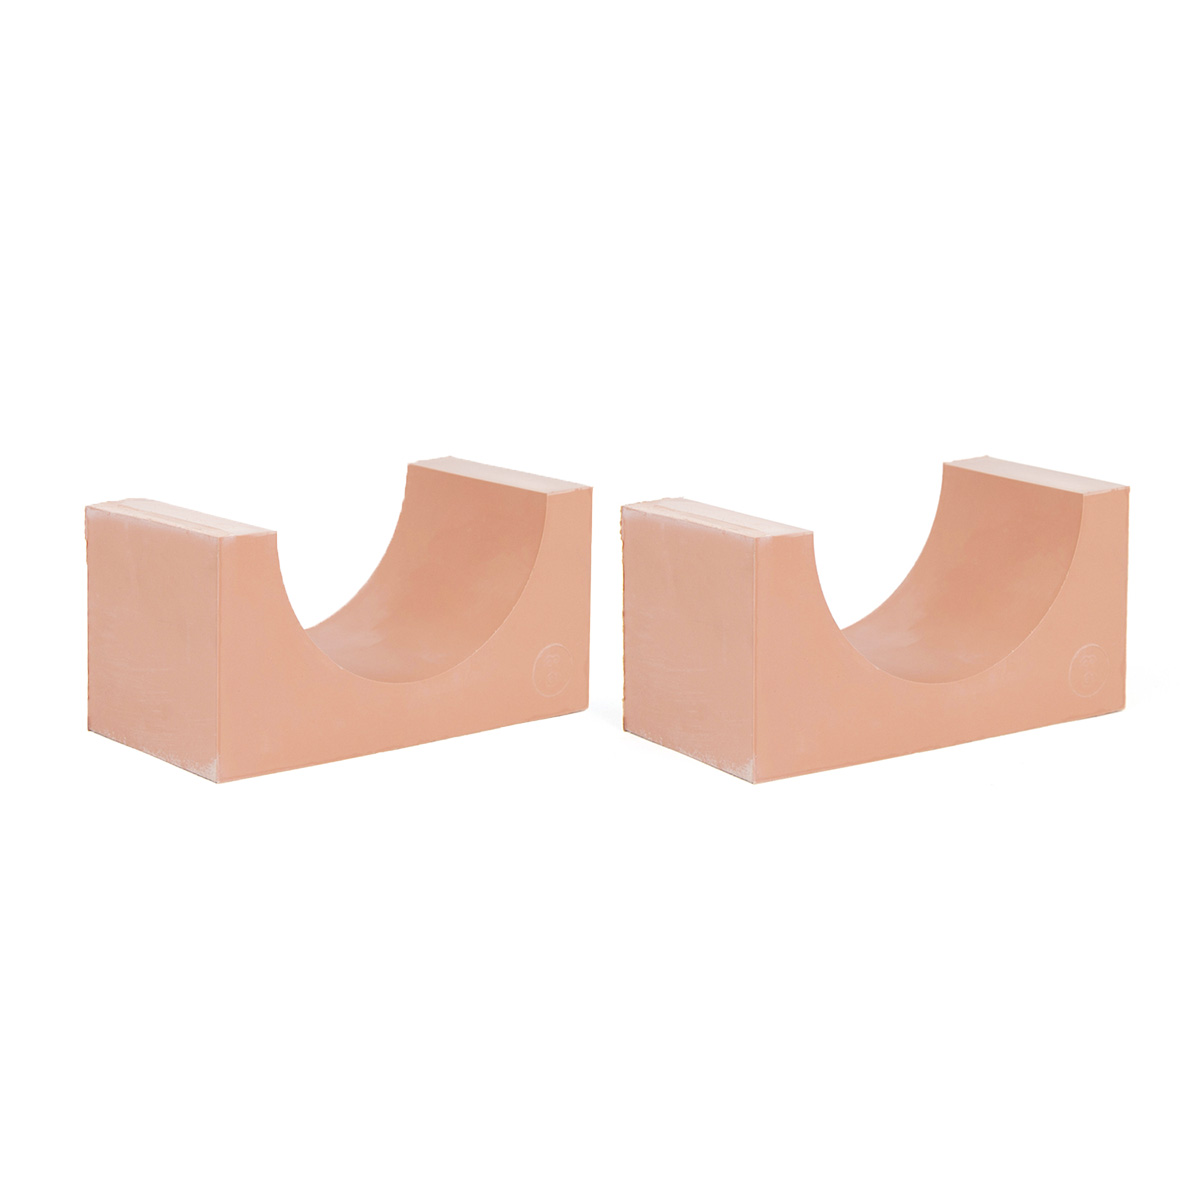 120-92*2 Set of 2 half insert block lycron, 120-92 for cable/pipe diam. 91.5-93.5mm